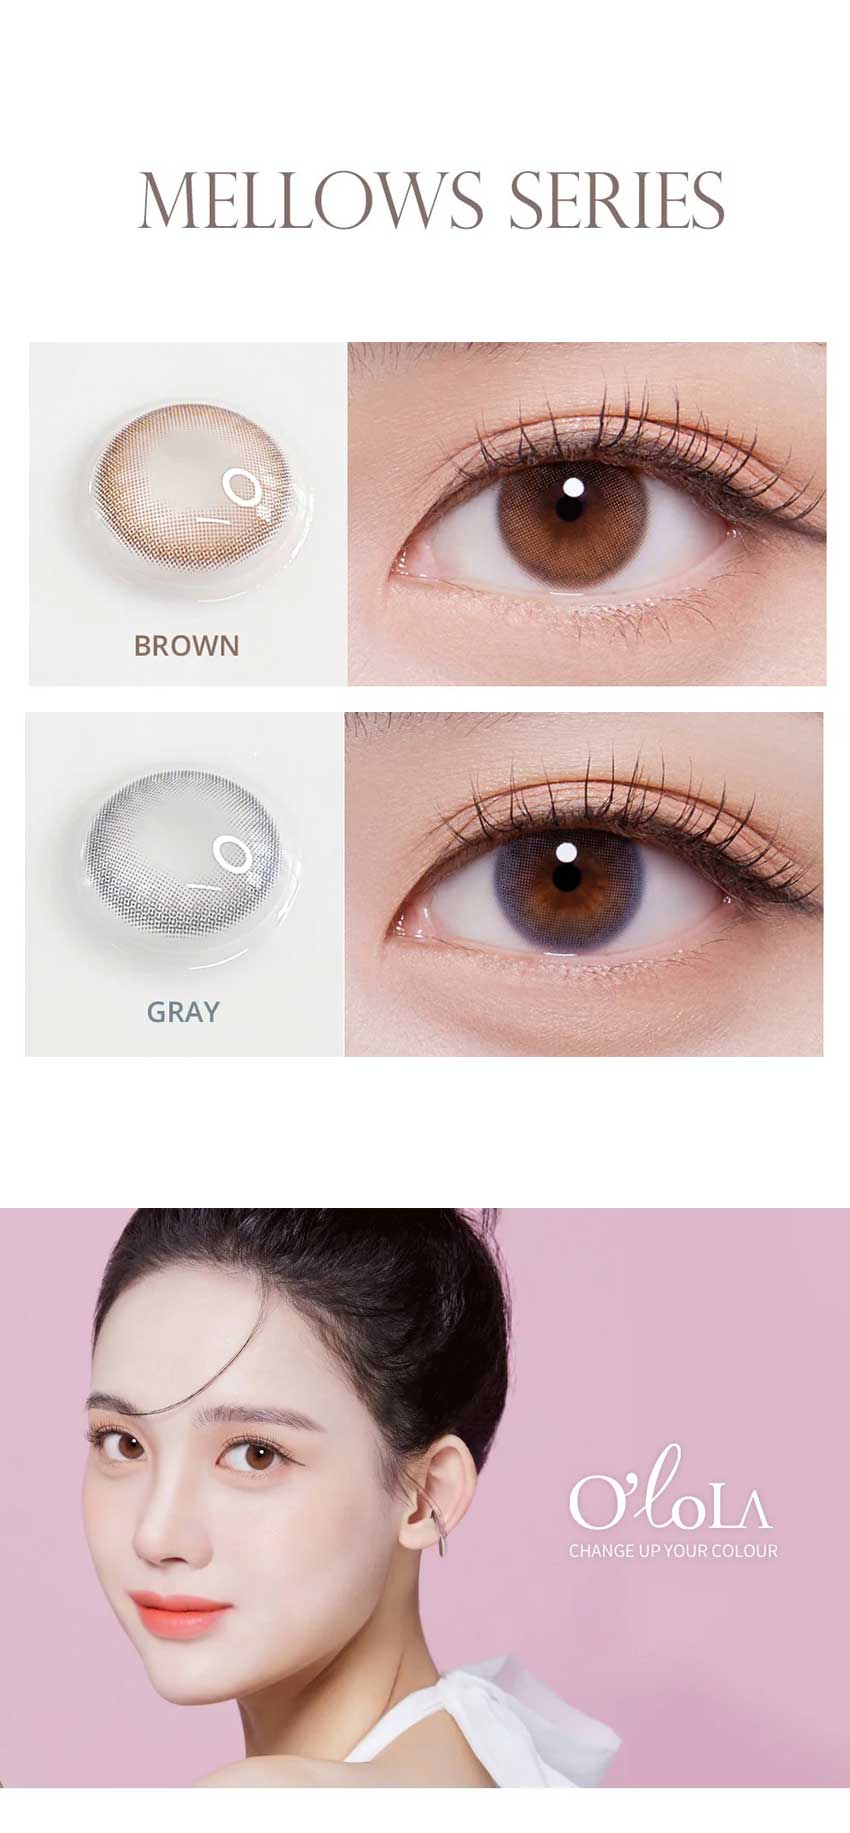  queenslens, queencontacts,olola,monthly,mellows,cotton,brown